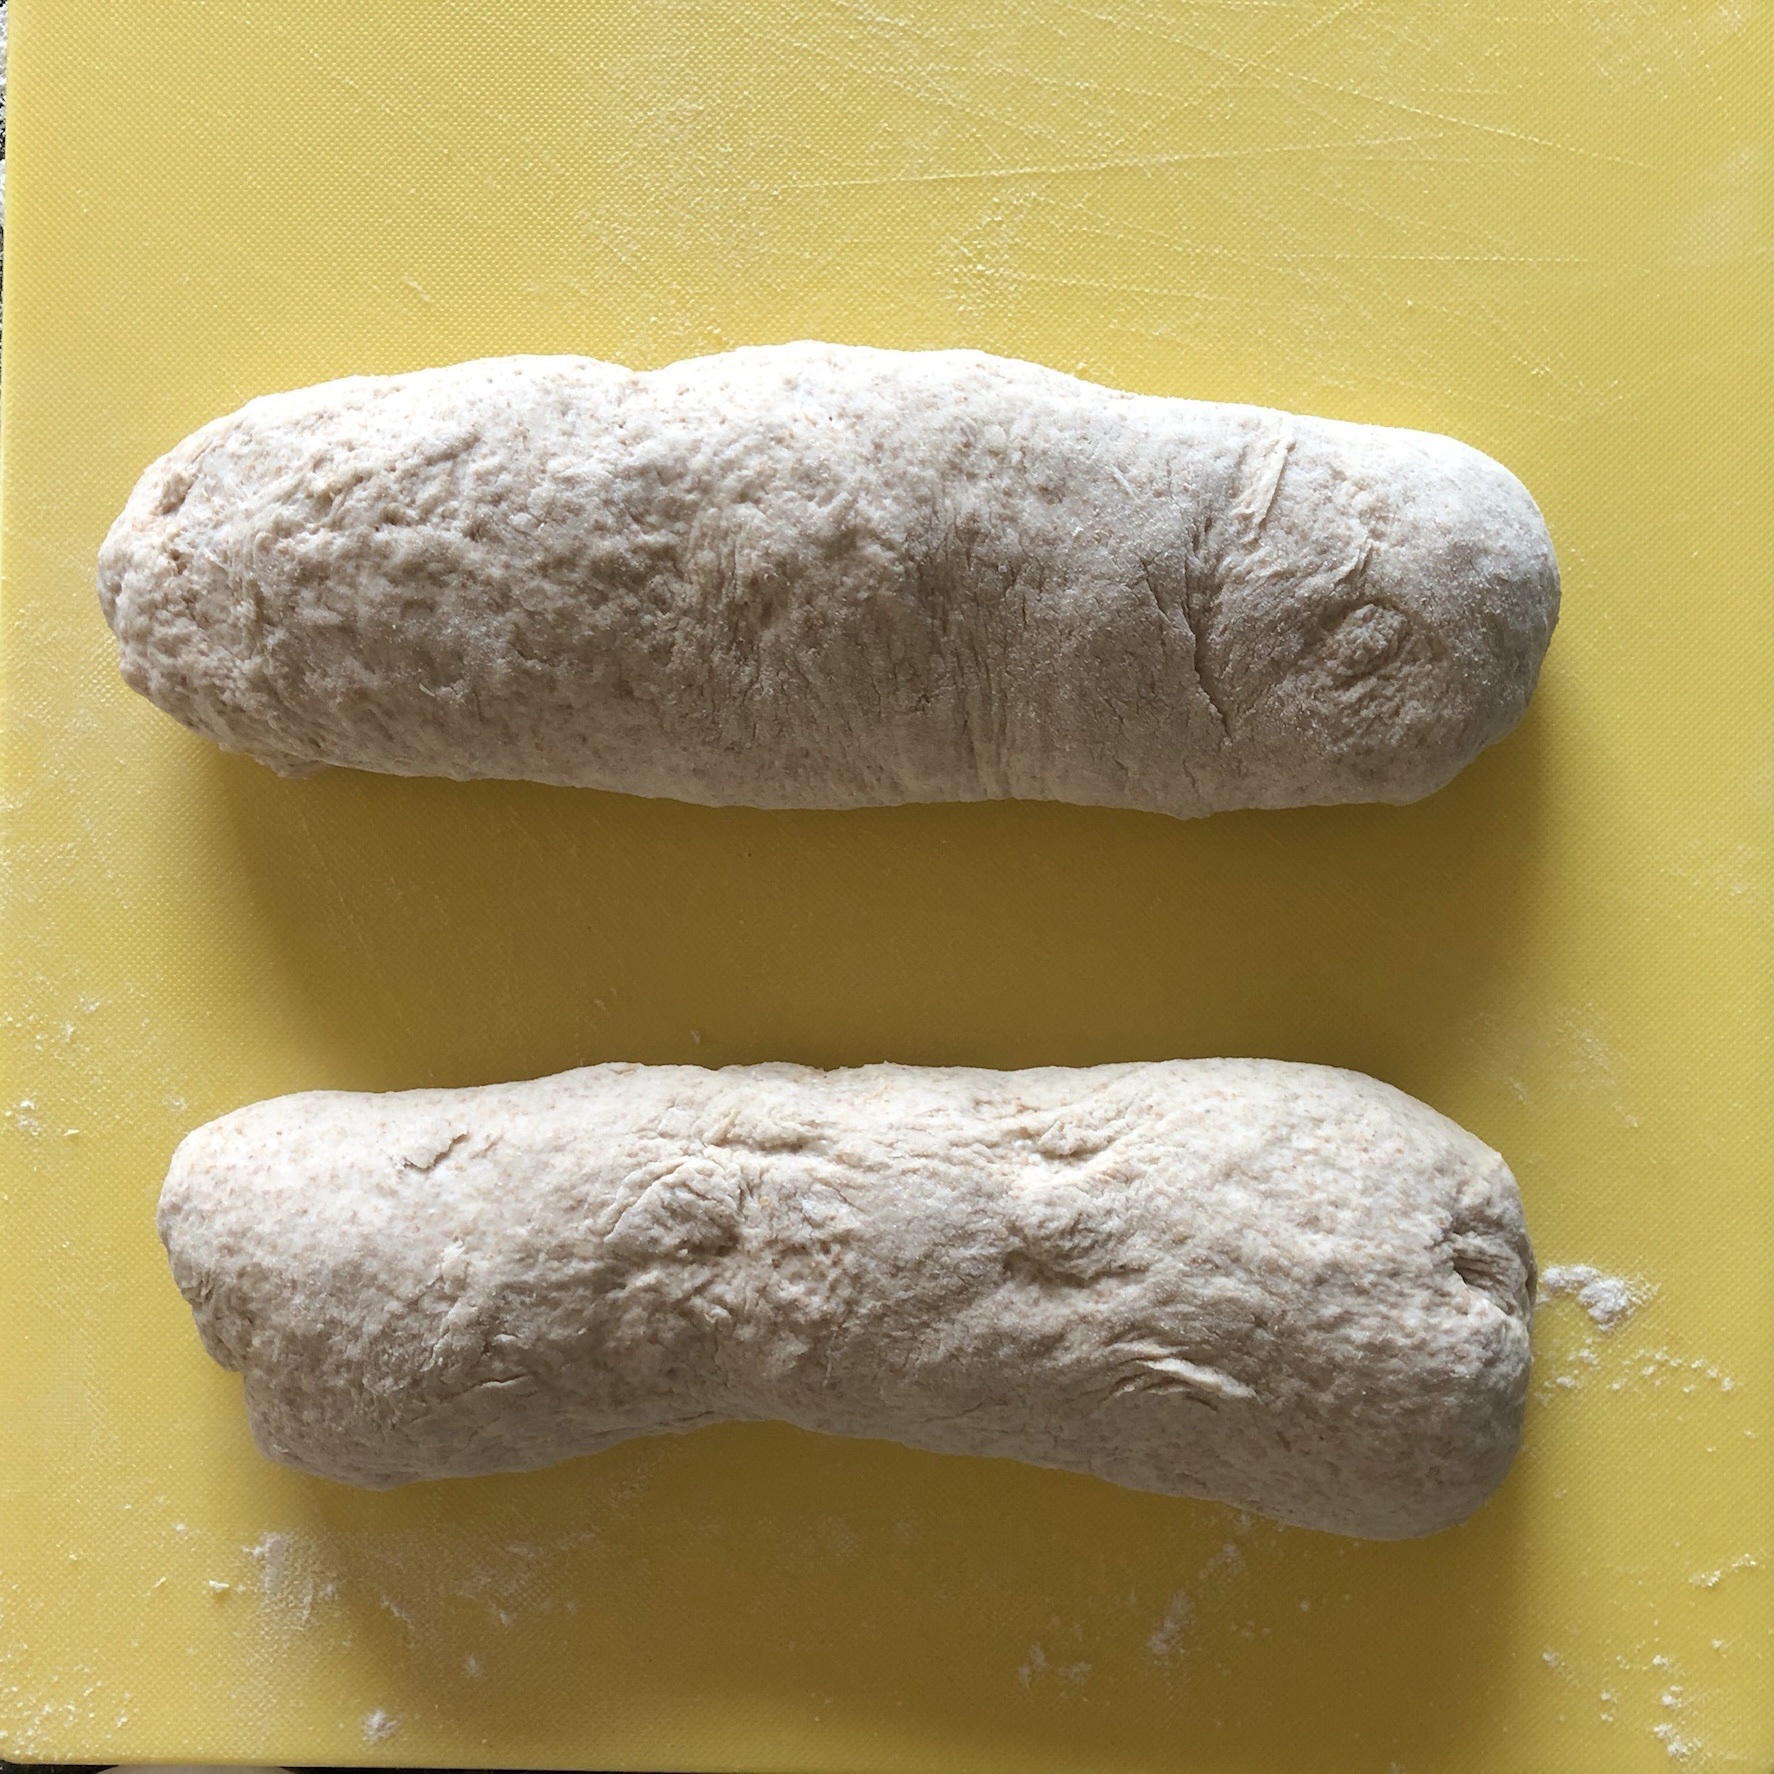 Two log rolls of dough on a yellow board